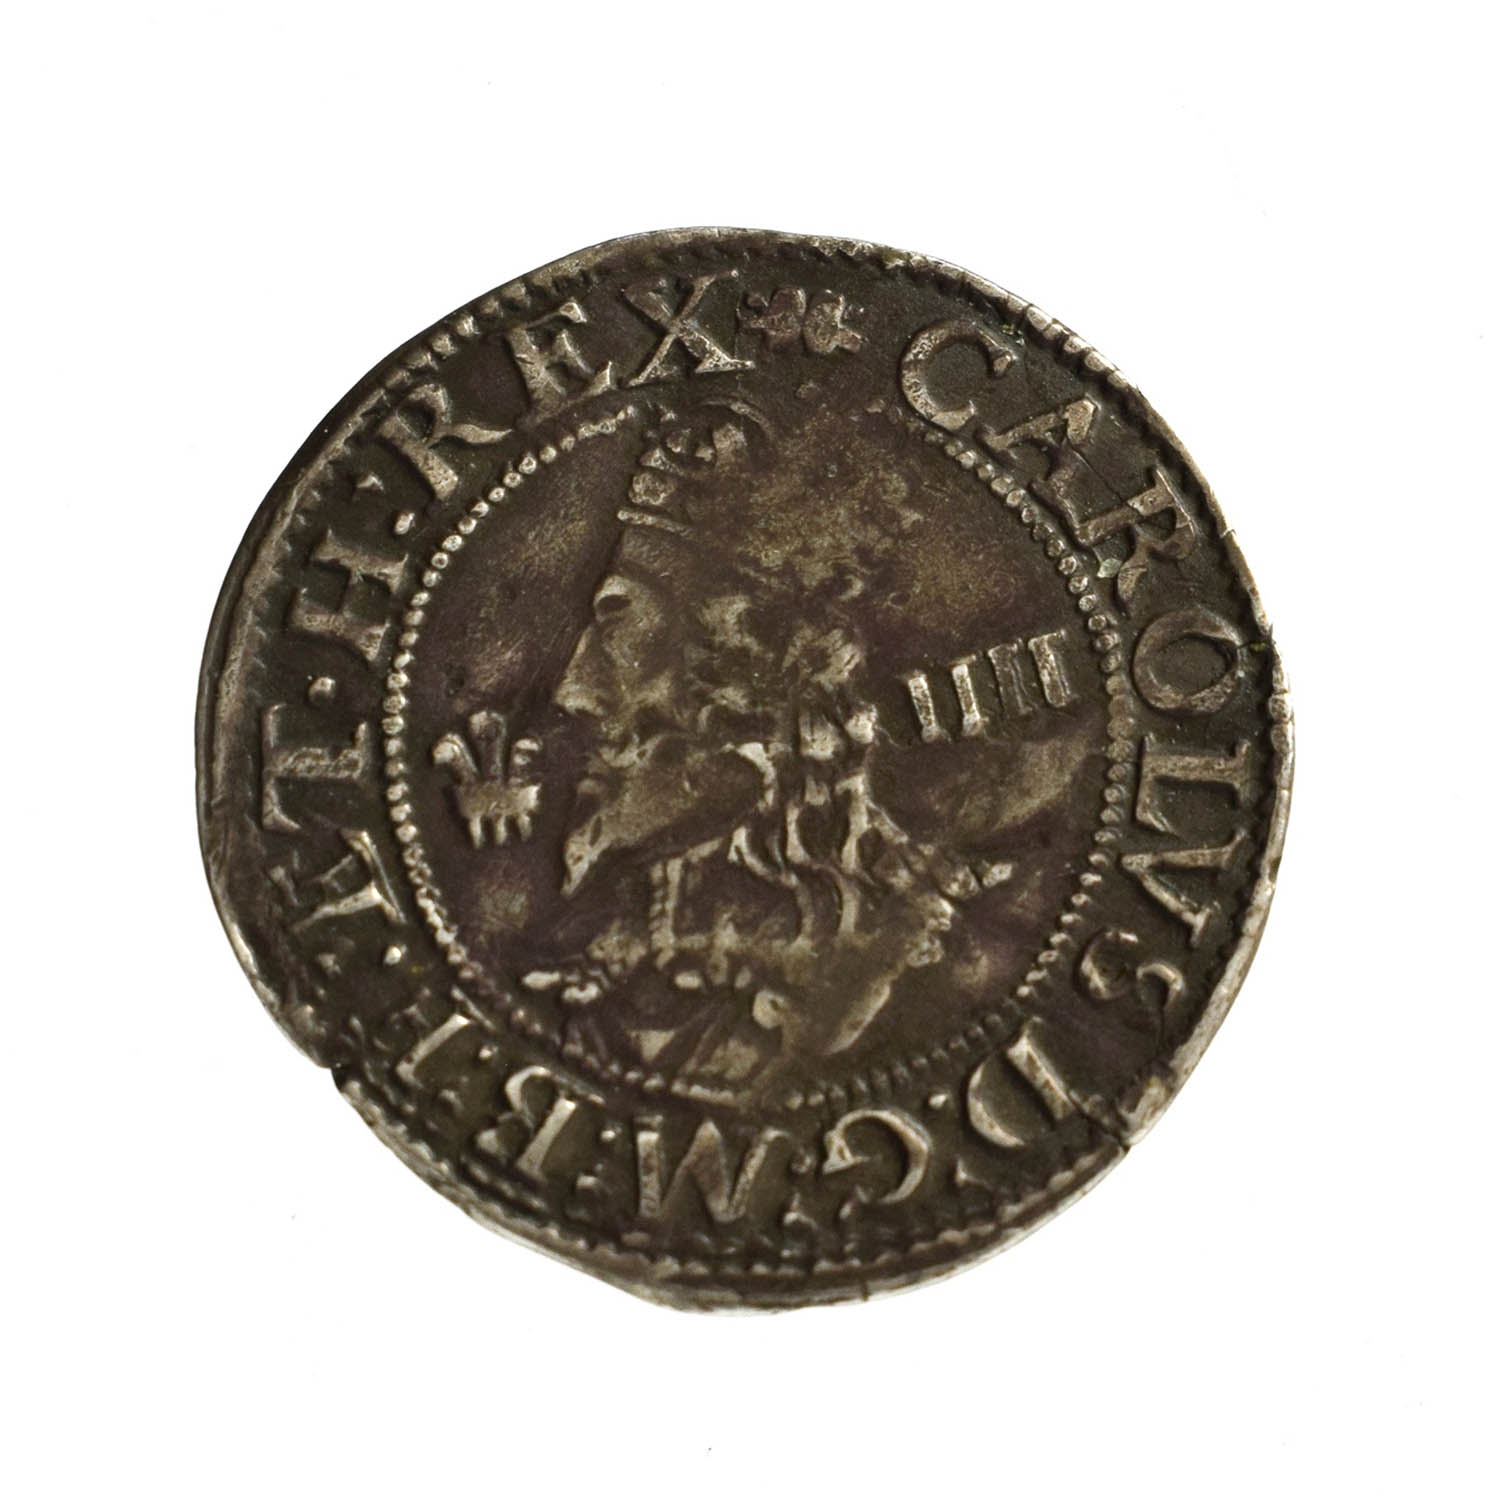 Lot 2036 - Charles I, Groat Aberystwyth Mint, mm. open book; obv. large bust with lace collar & no armour...